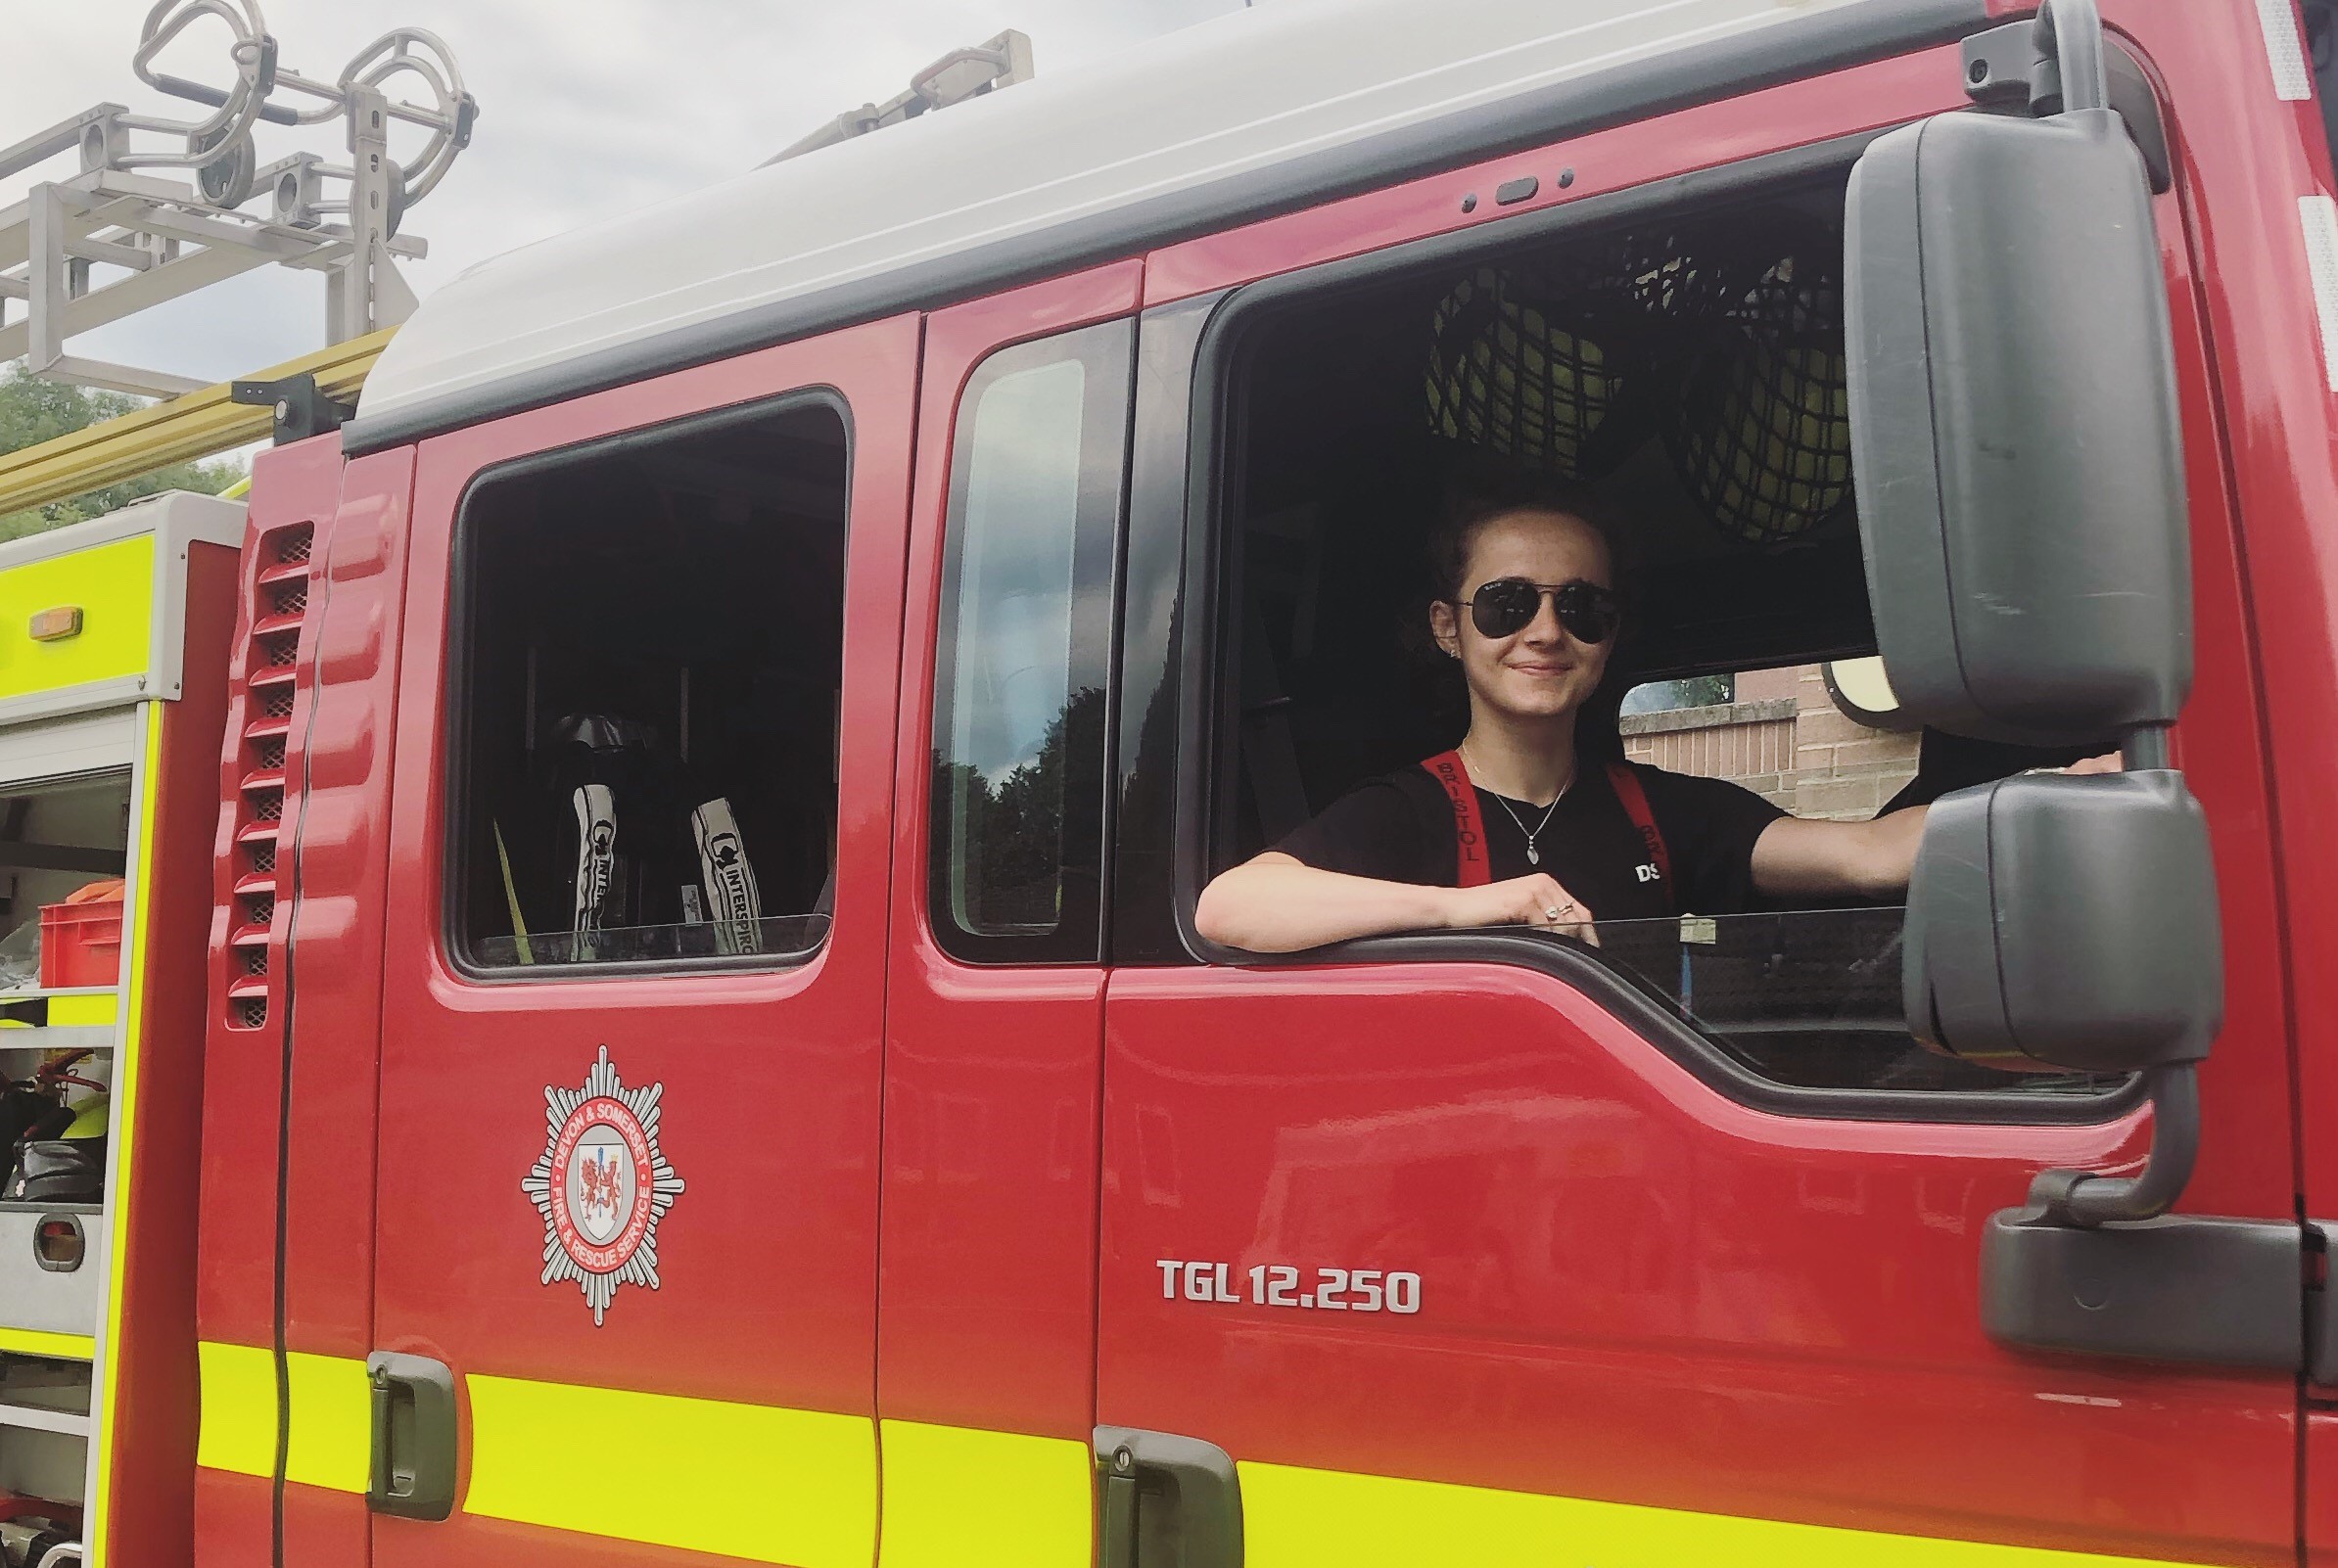 Lexie in a fire engine